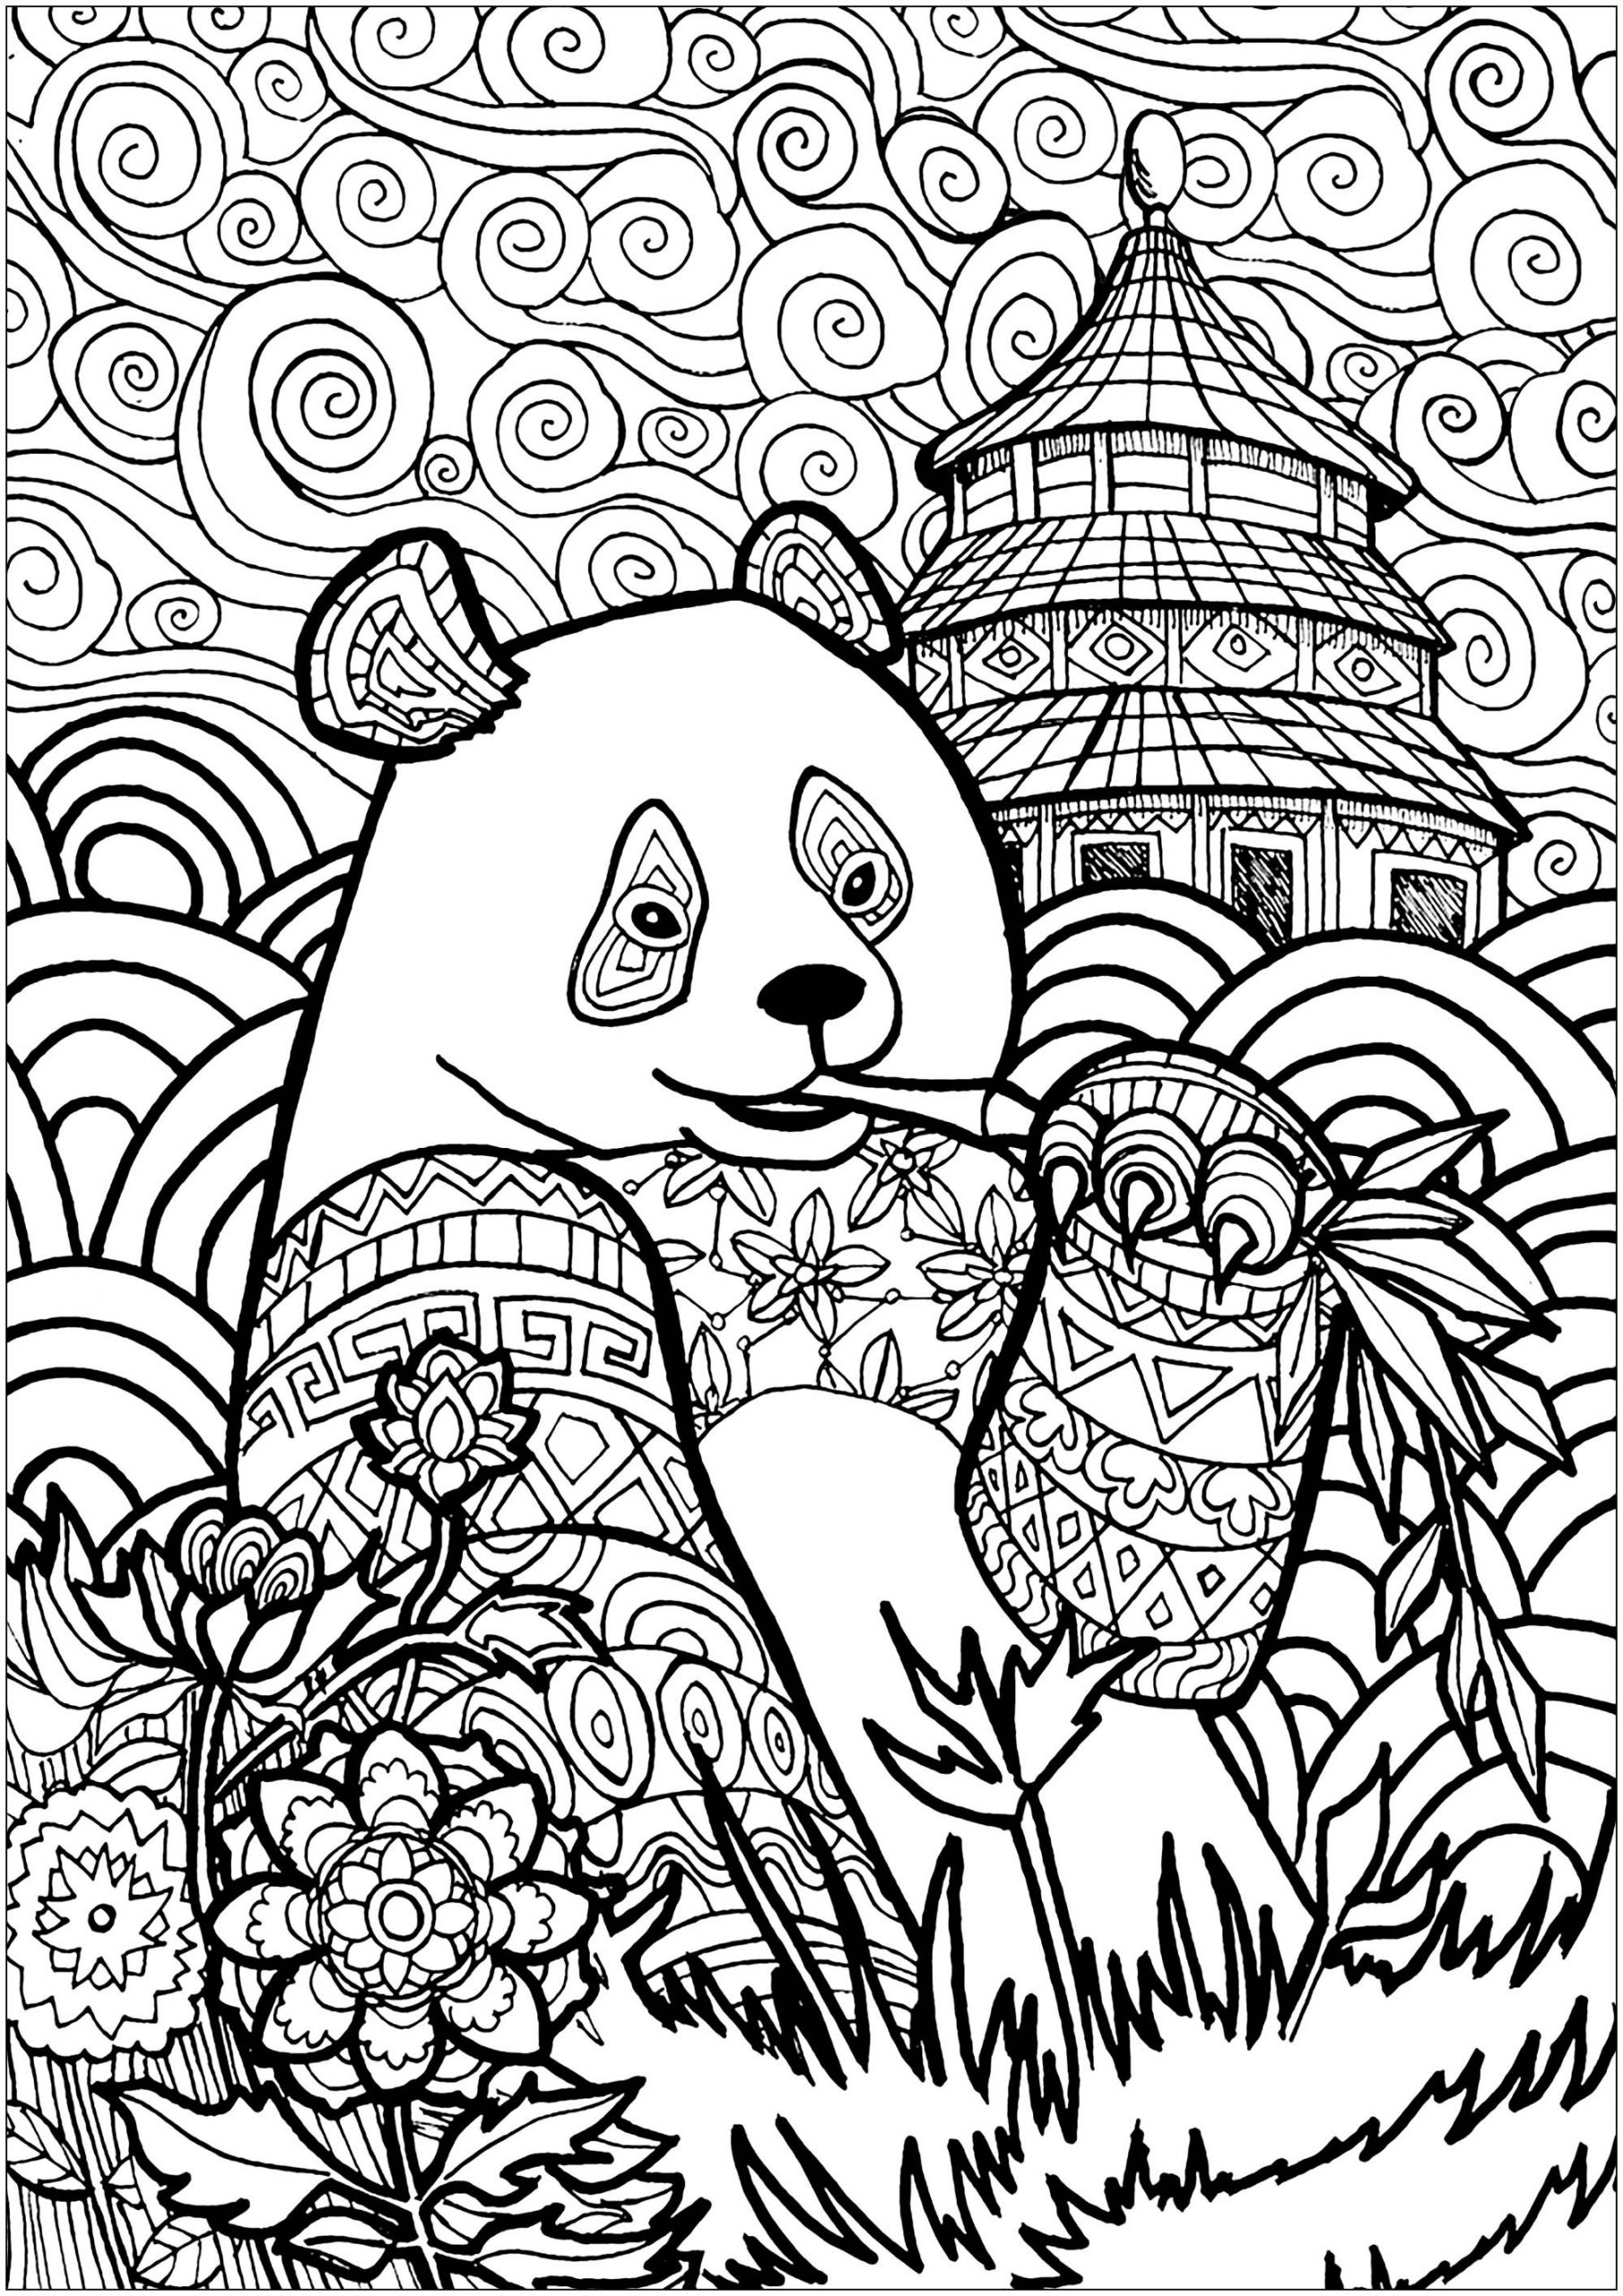 Panda Coloring Pages For Adults
 Panda in China Panda Adult Coloring Pages